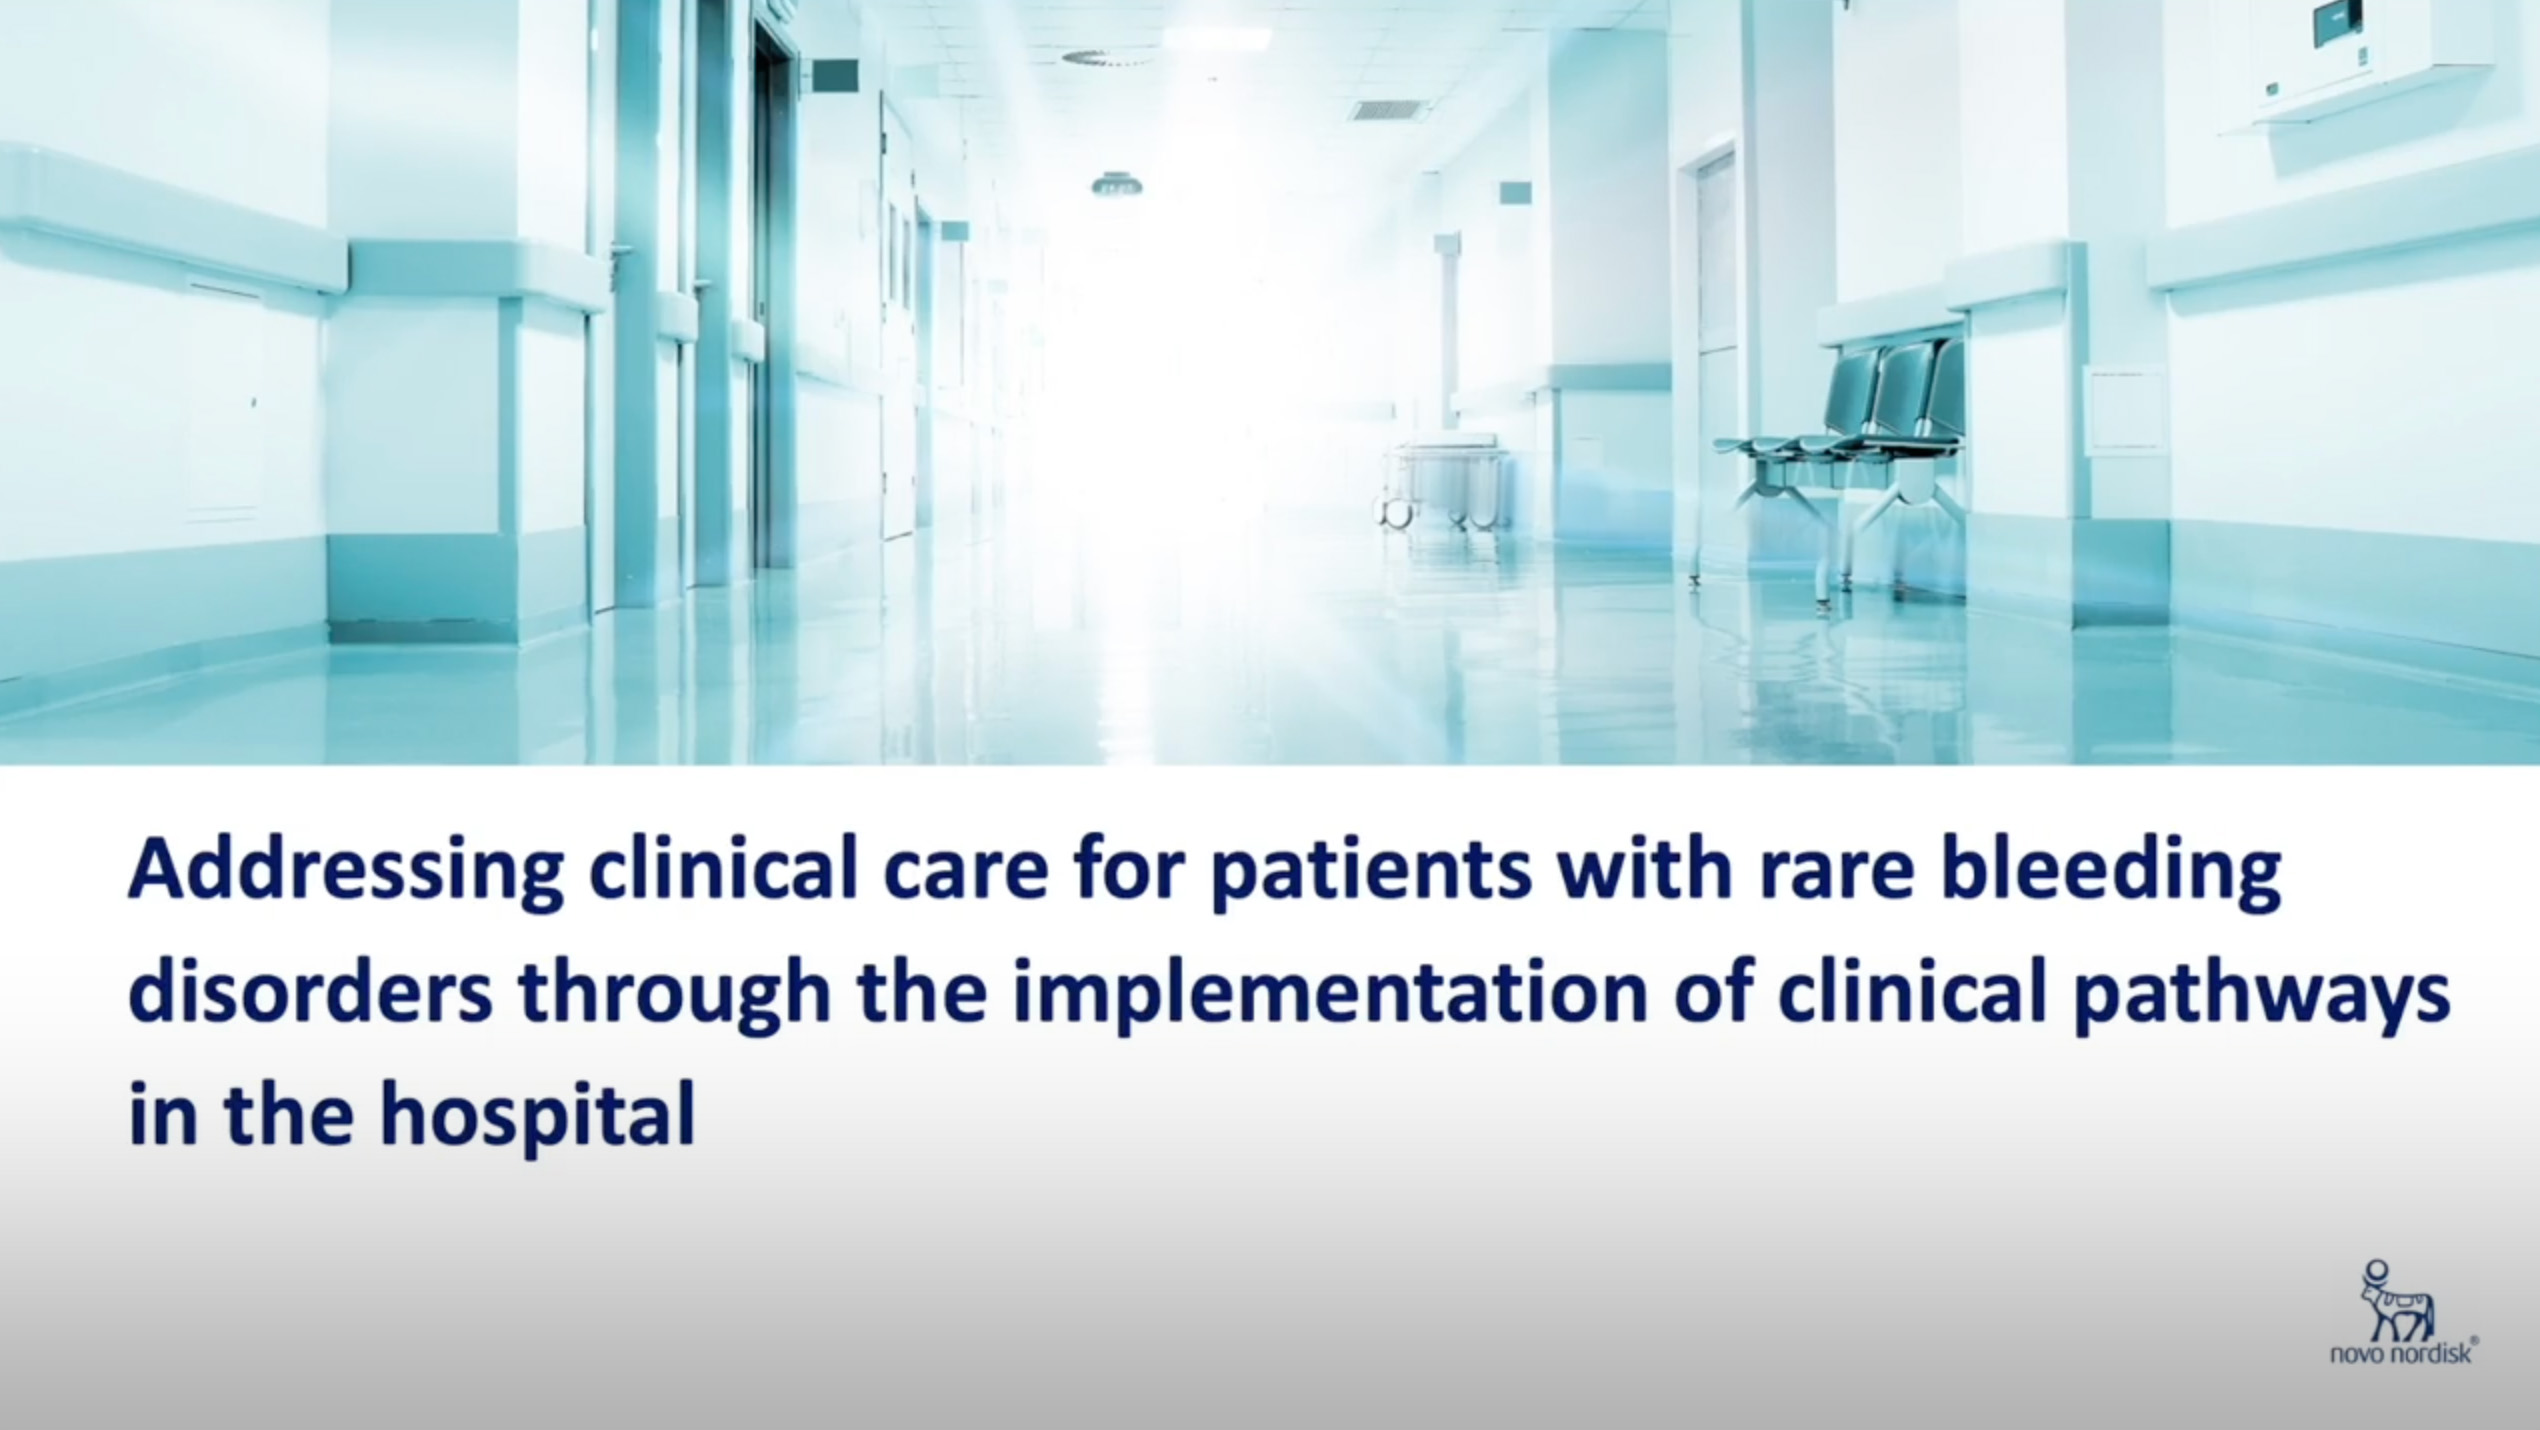 Addressing clinical care for patients with rare bleeding disorders through the implementation of clinical pathways in the hospital